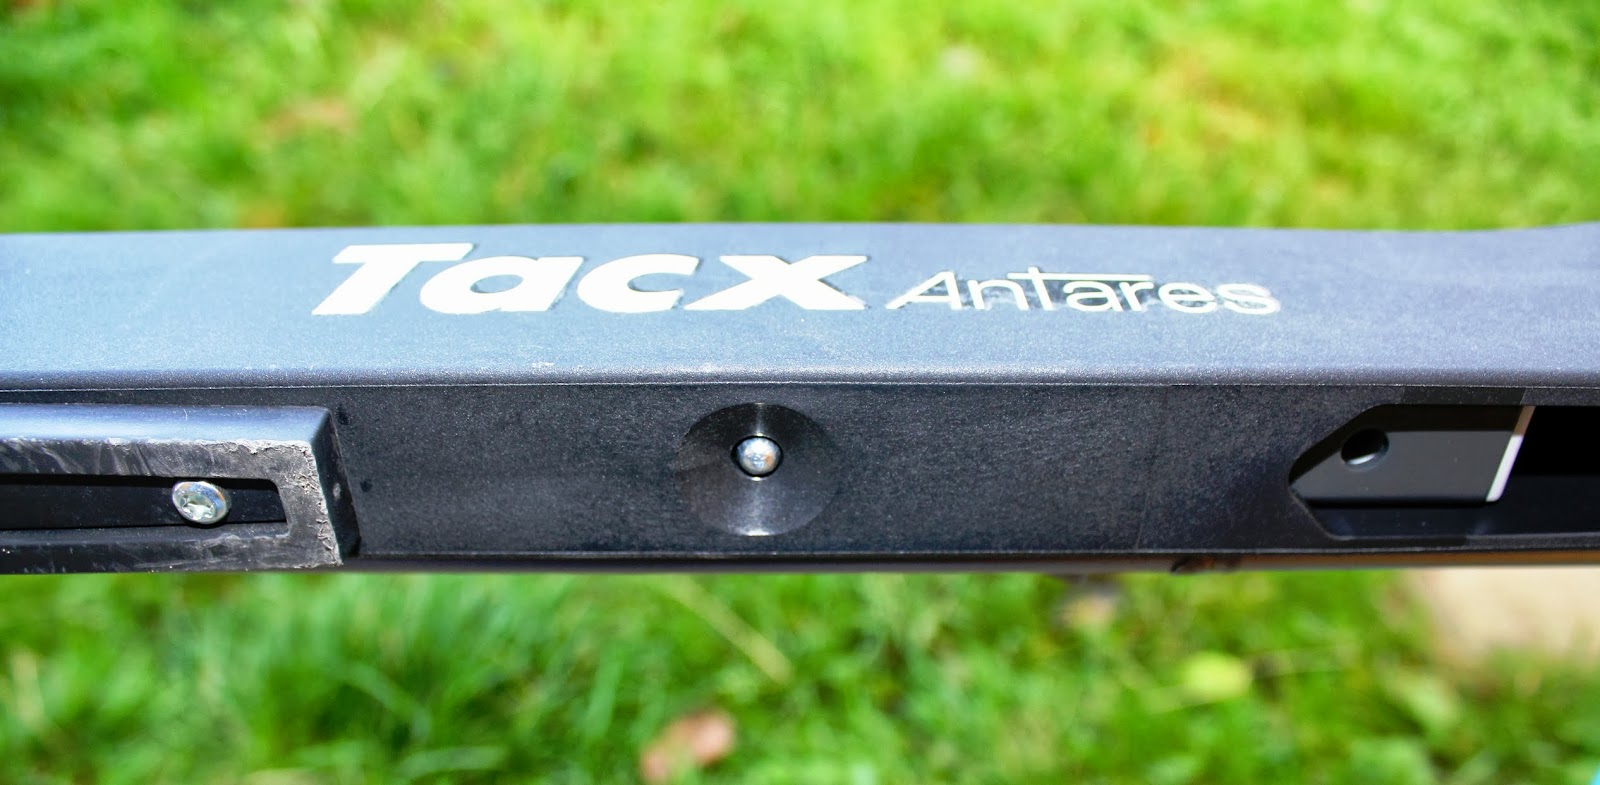 Review – Tacx Antares Cycle Training Rollers